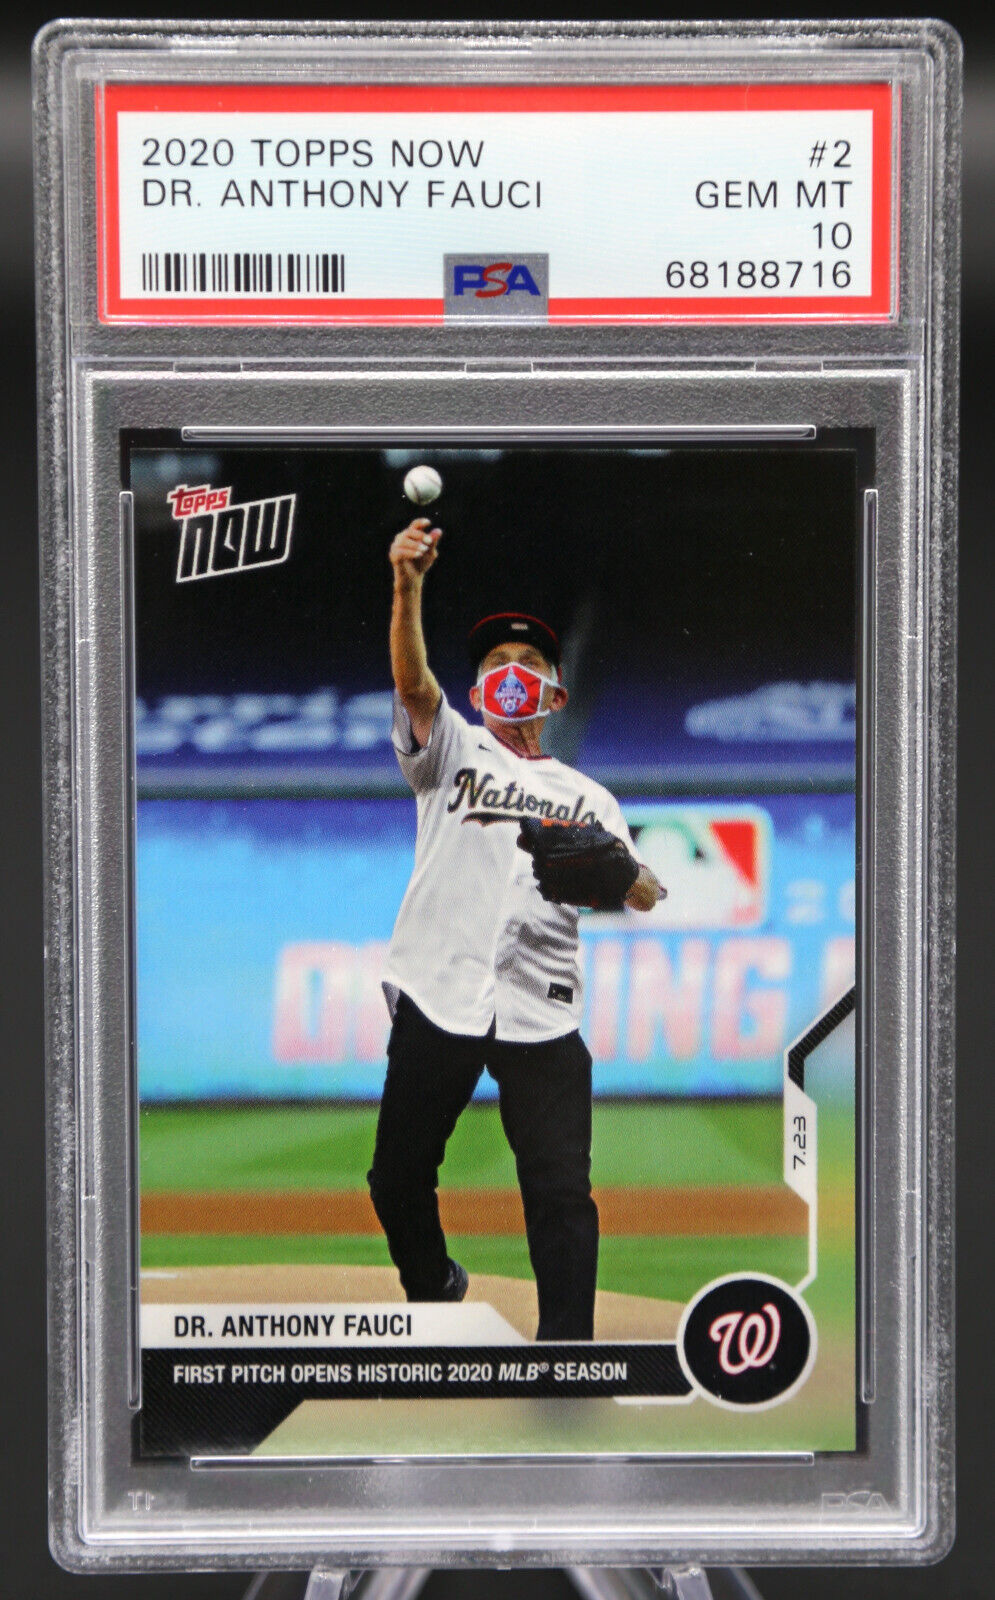 2020 Topps Now DR ANTHONY FAUCI #2 First Pitch PSA 10 Gem Mint 💎 🇺🇸 ⚾️